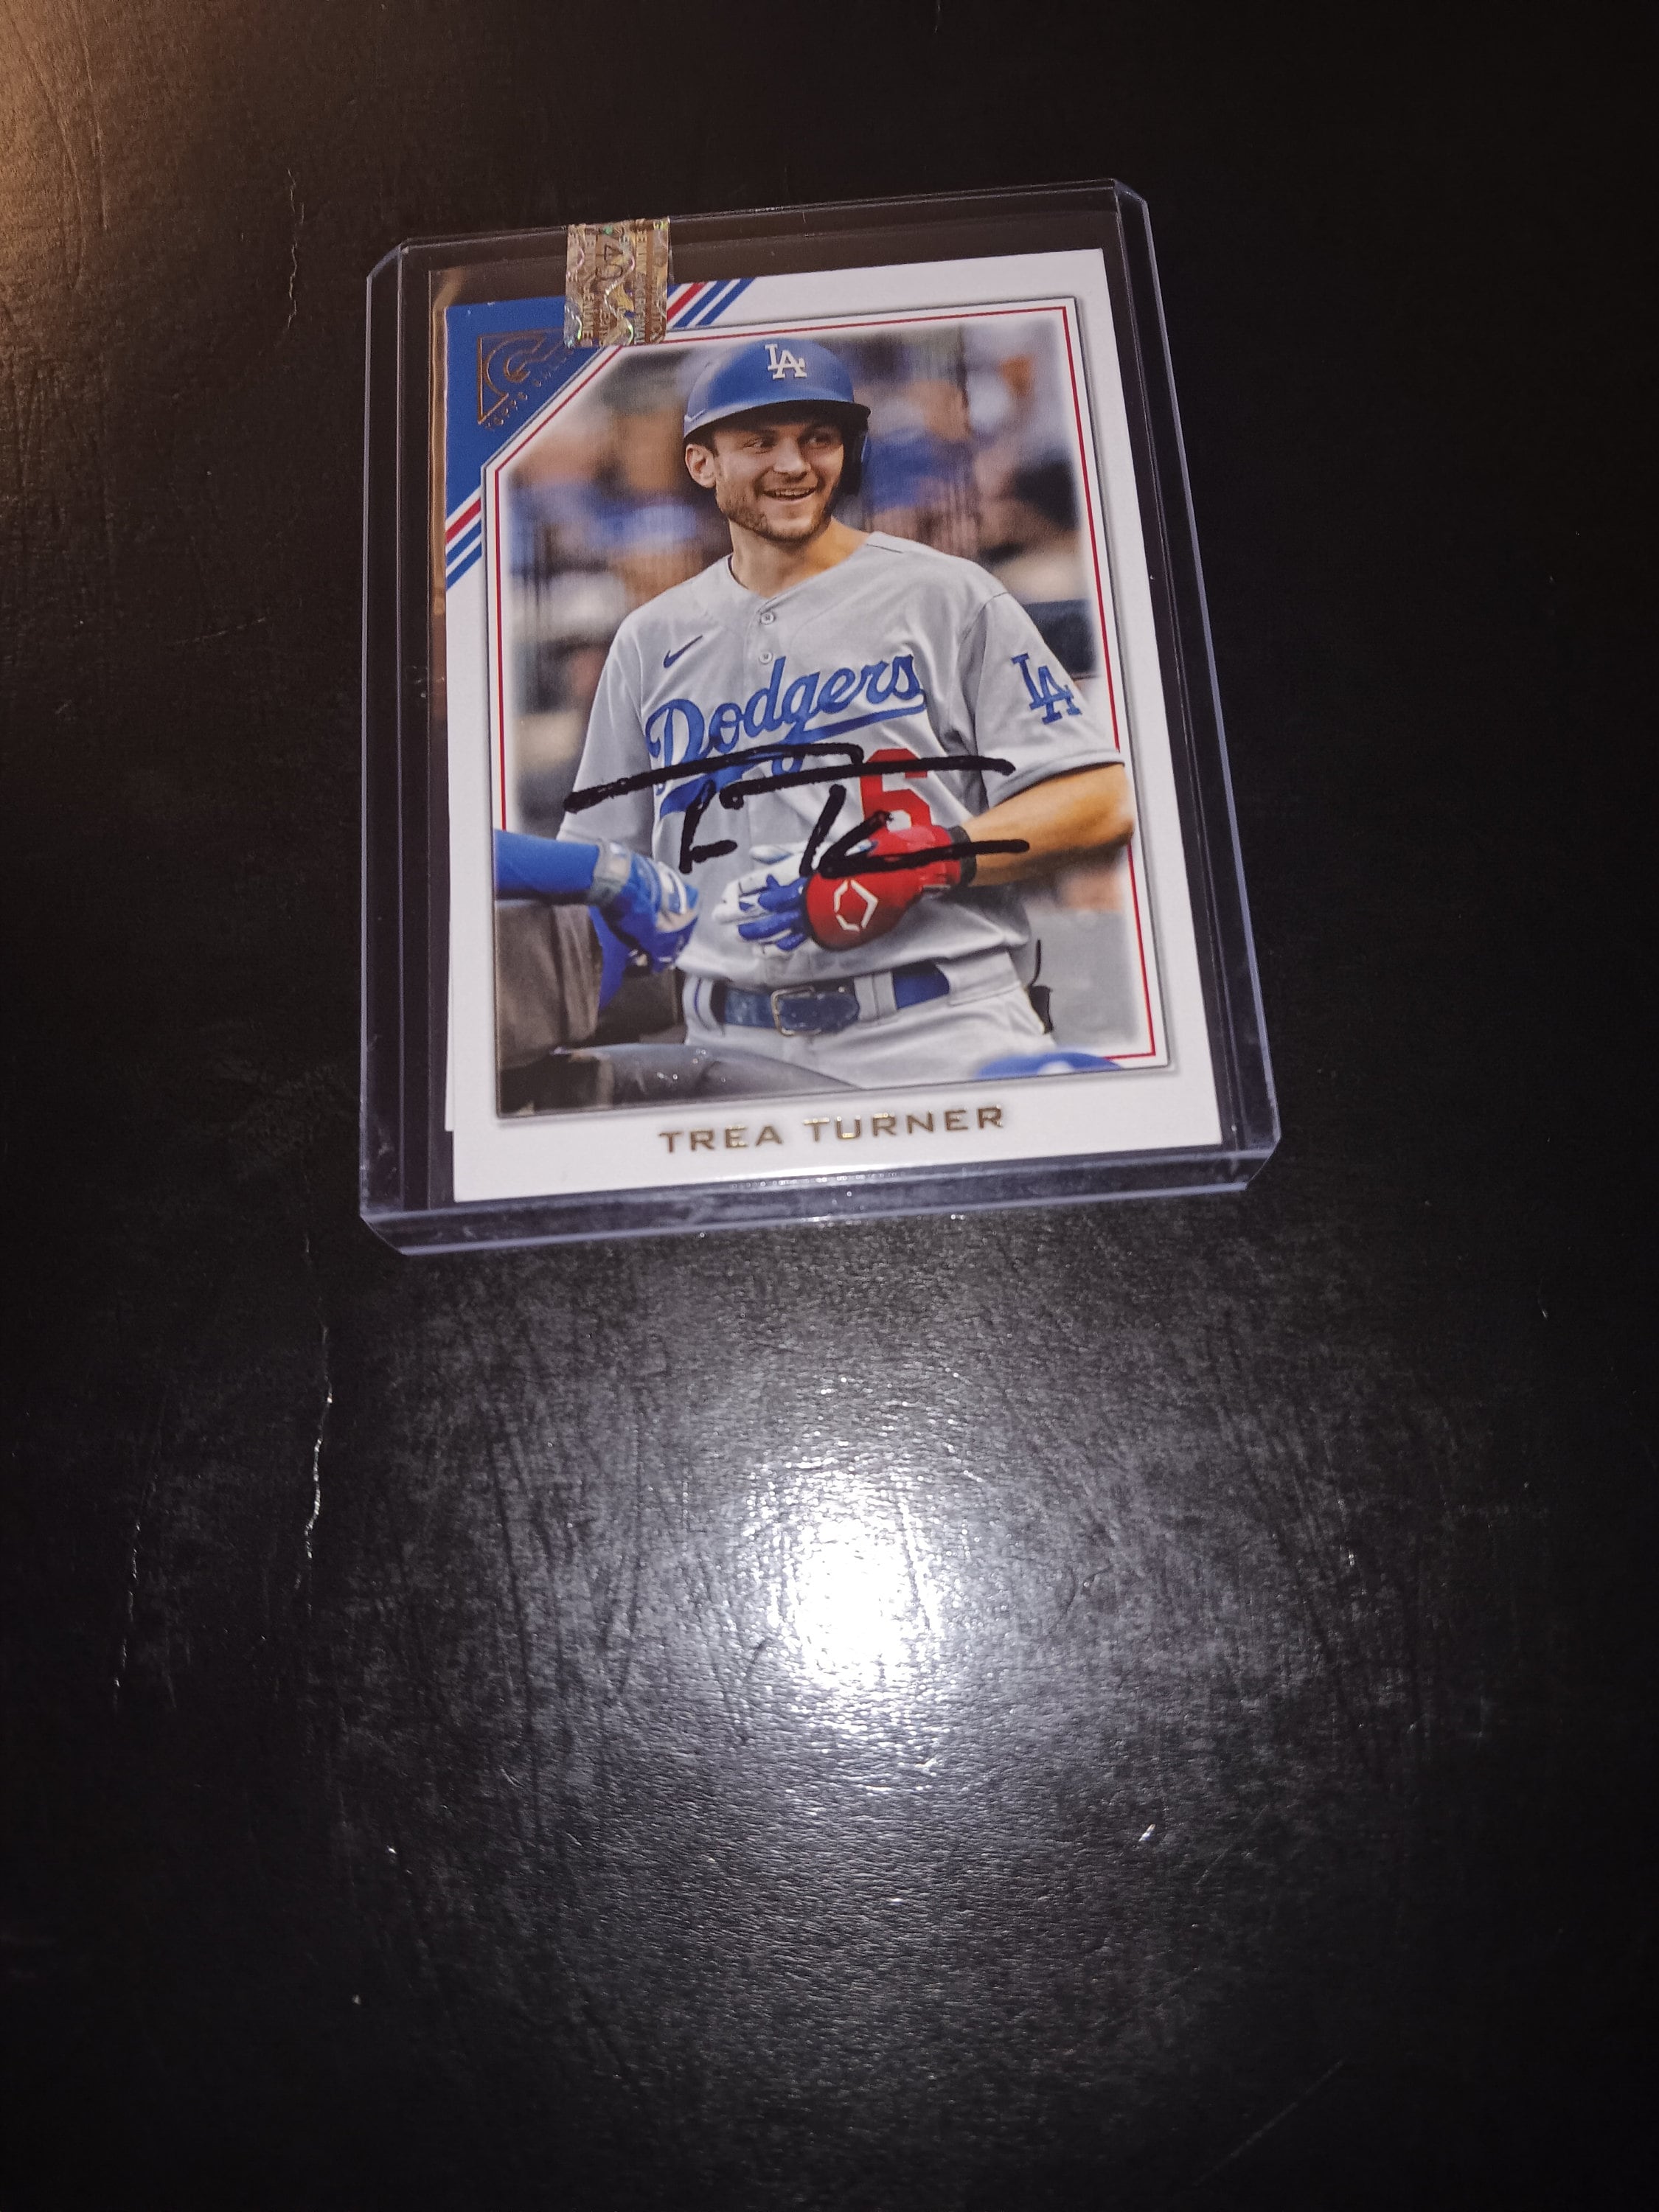 Autograph card signed by Los Angeles Dodgers Trea Turner.